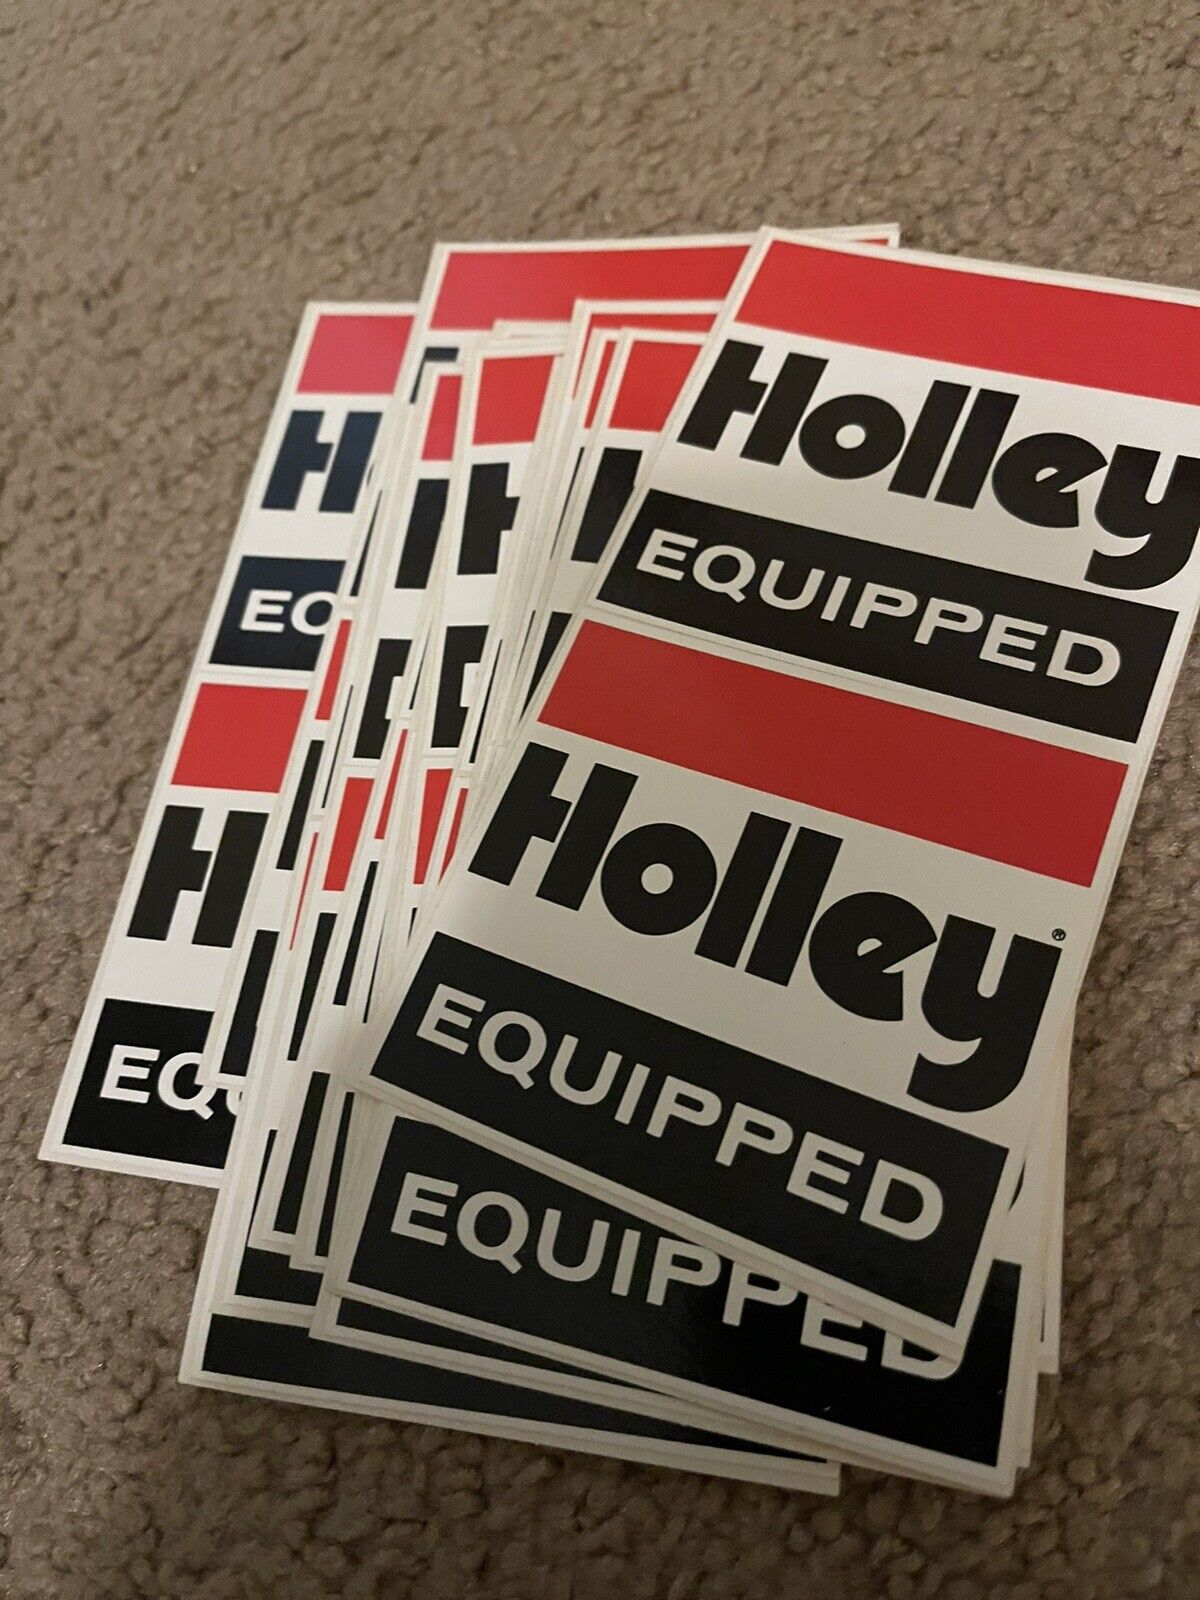 HOLLEY Equipped  Original Vintage 1960's 70's Racing Sticker 3.50 inch Lot Of 26